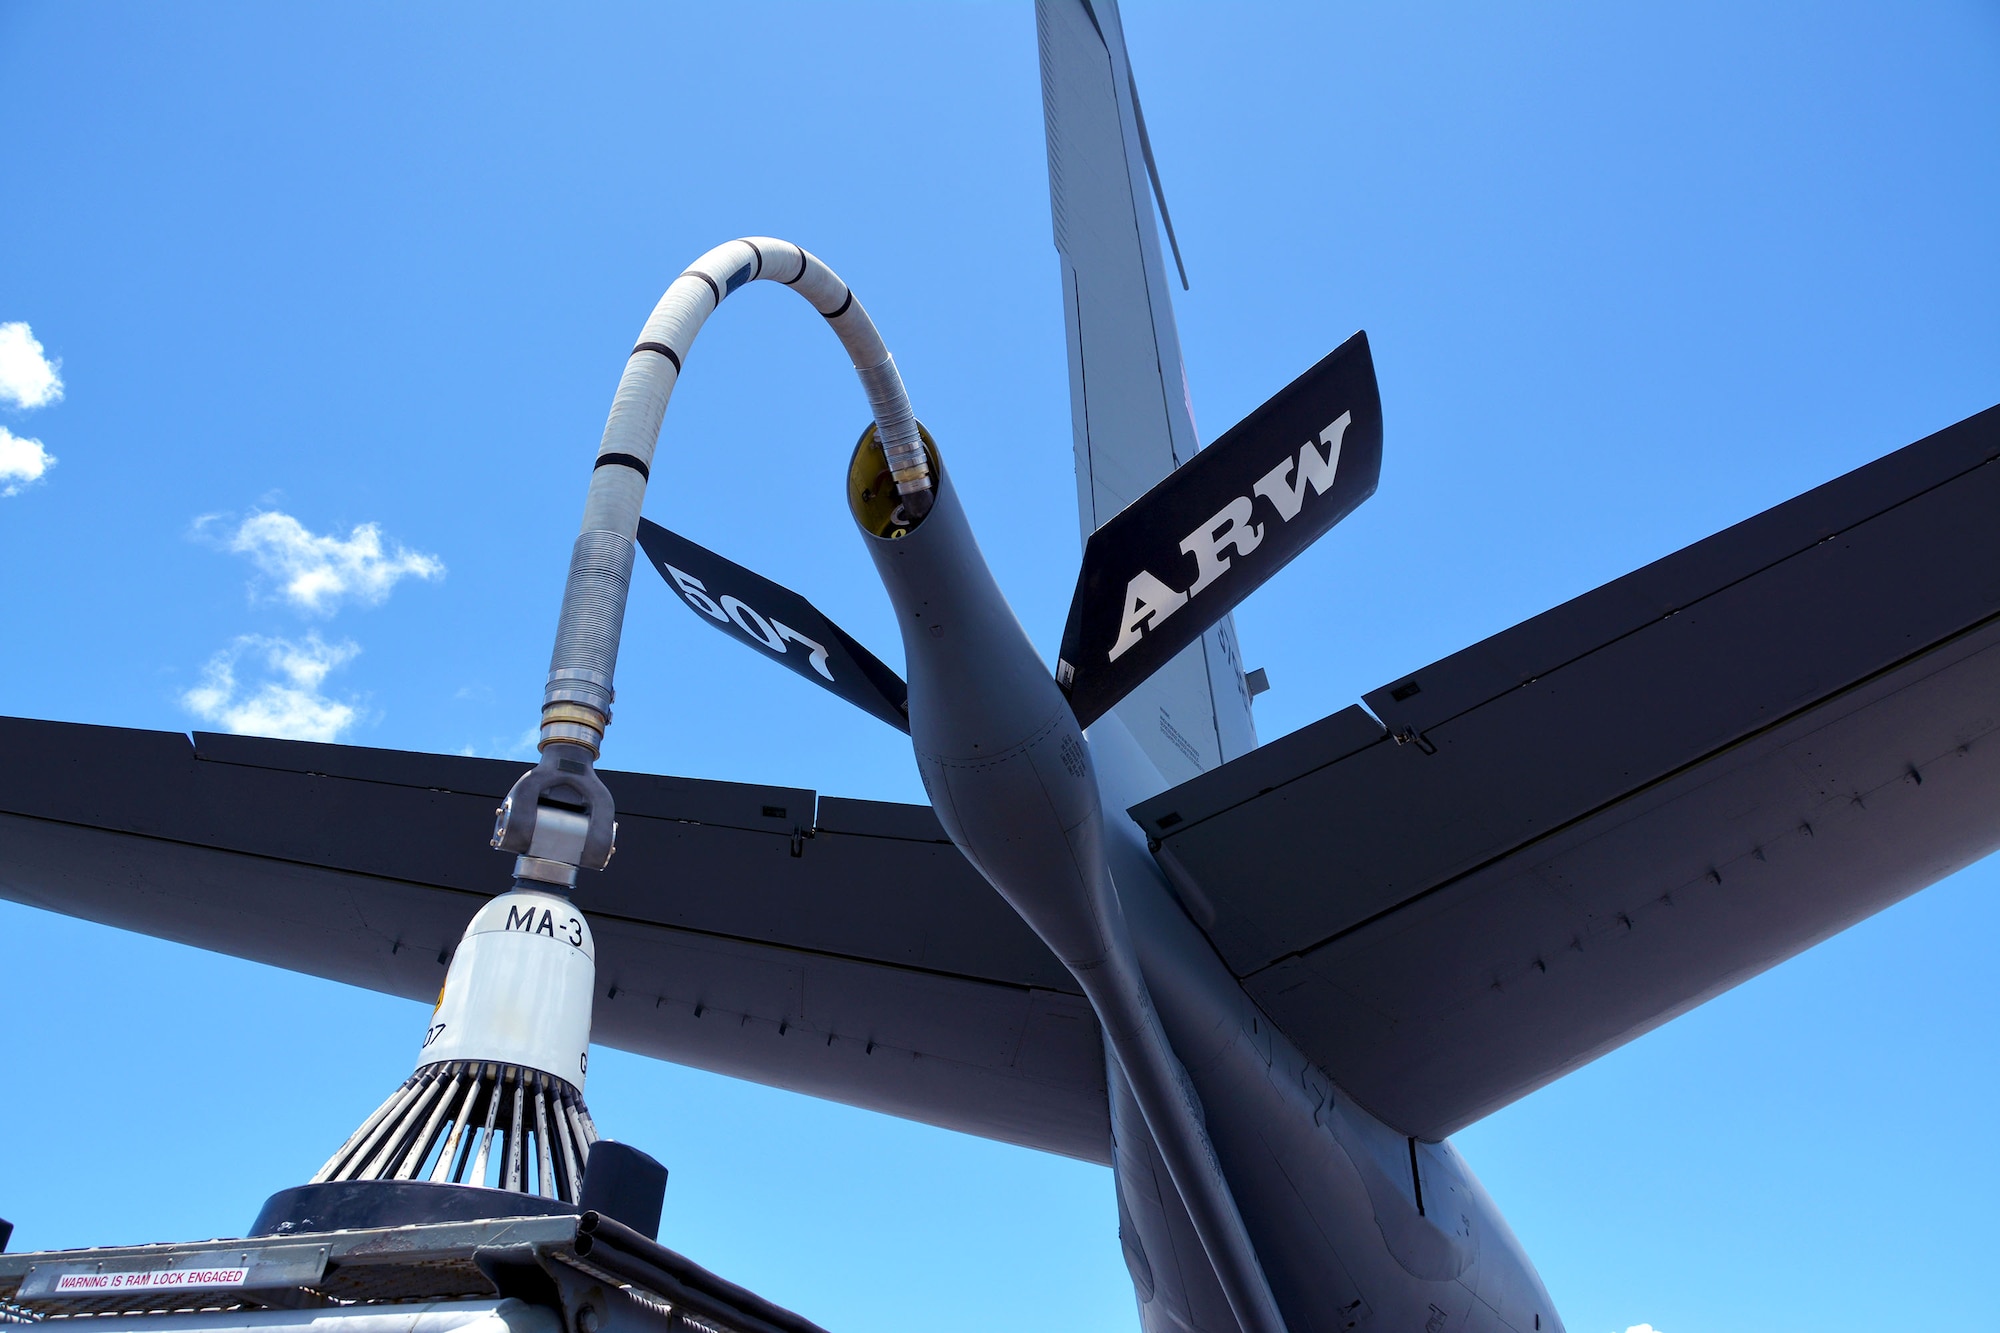 A KC-135R Stratotanker from the 507th Air Refueling Wing, Tinker Air Force Base, Oklahoma, is prepped for flight with a hose-and-drogue attached to the refueling boom July 9, in support of the Rim of the Pacific (RIMPAC) exercise. Twenty-five nations, 46 ships, five submarines, and about 200 aircraft and 25,000 personnel are participating in RIMPAC from June 27 to Aug. 2 in and around the Hawaiian Islands and Southern California. The world’s largest international maritime exercise, RIMPAC provides a unique training opportunity while fostering and sustaining cooperative relationships among participants critical to ensuring the safety of sea lanes and security of the world’s oceans. RIMPAC 2018 is the 26th exercise in the series that began in 1971. (U.S. Air Force photo by Tech. Sgt. Samantha Mathison)